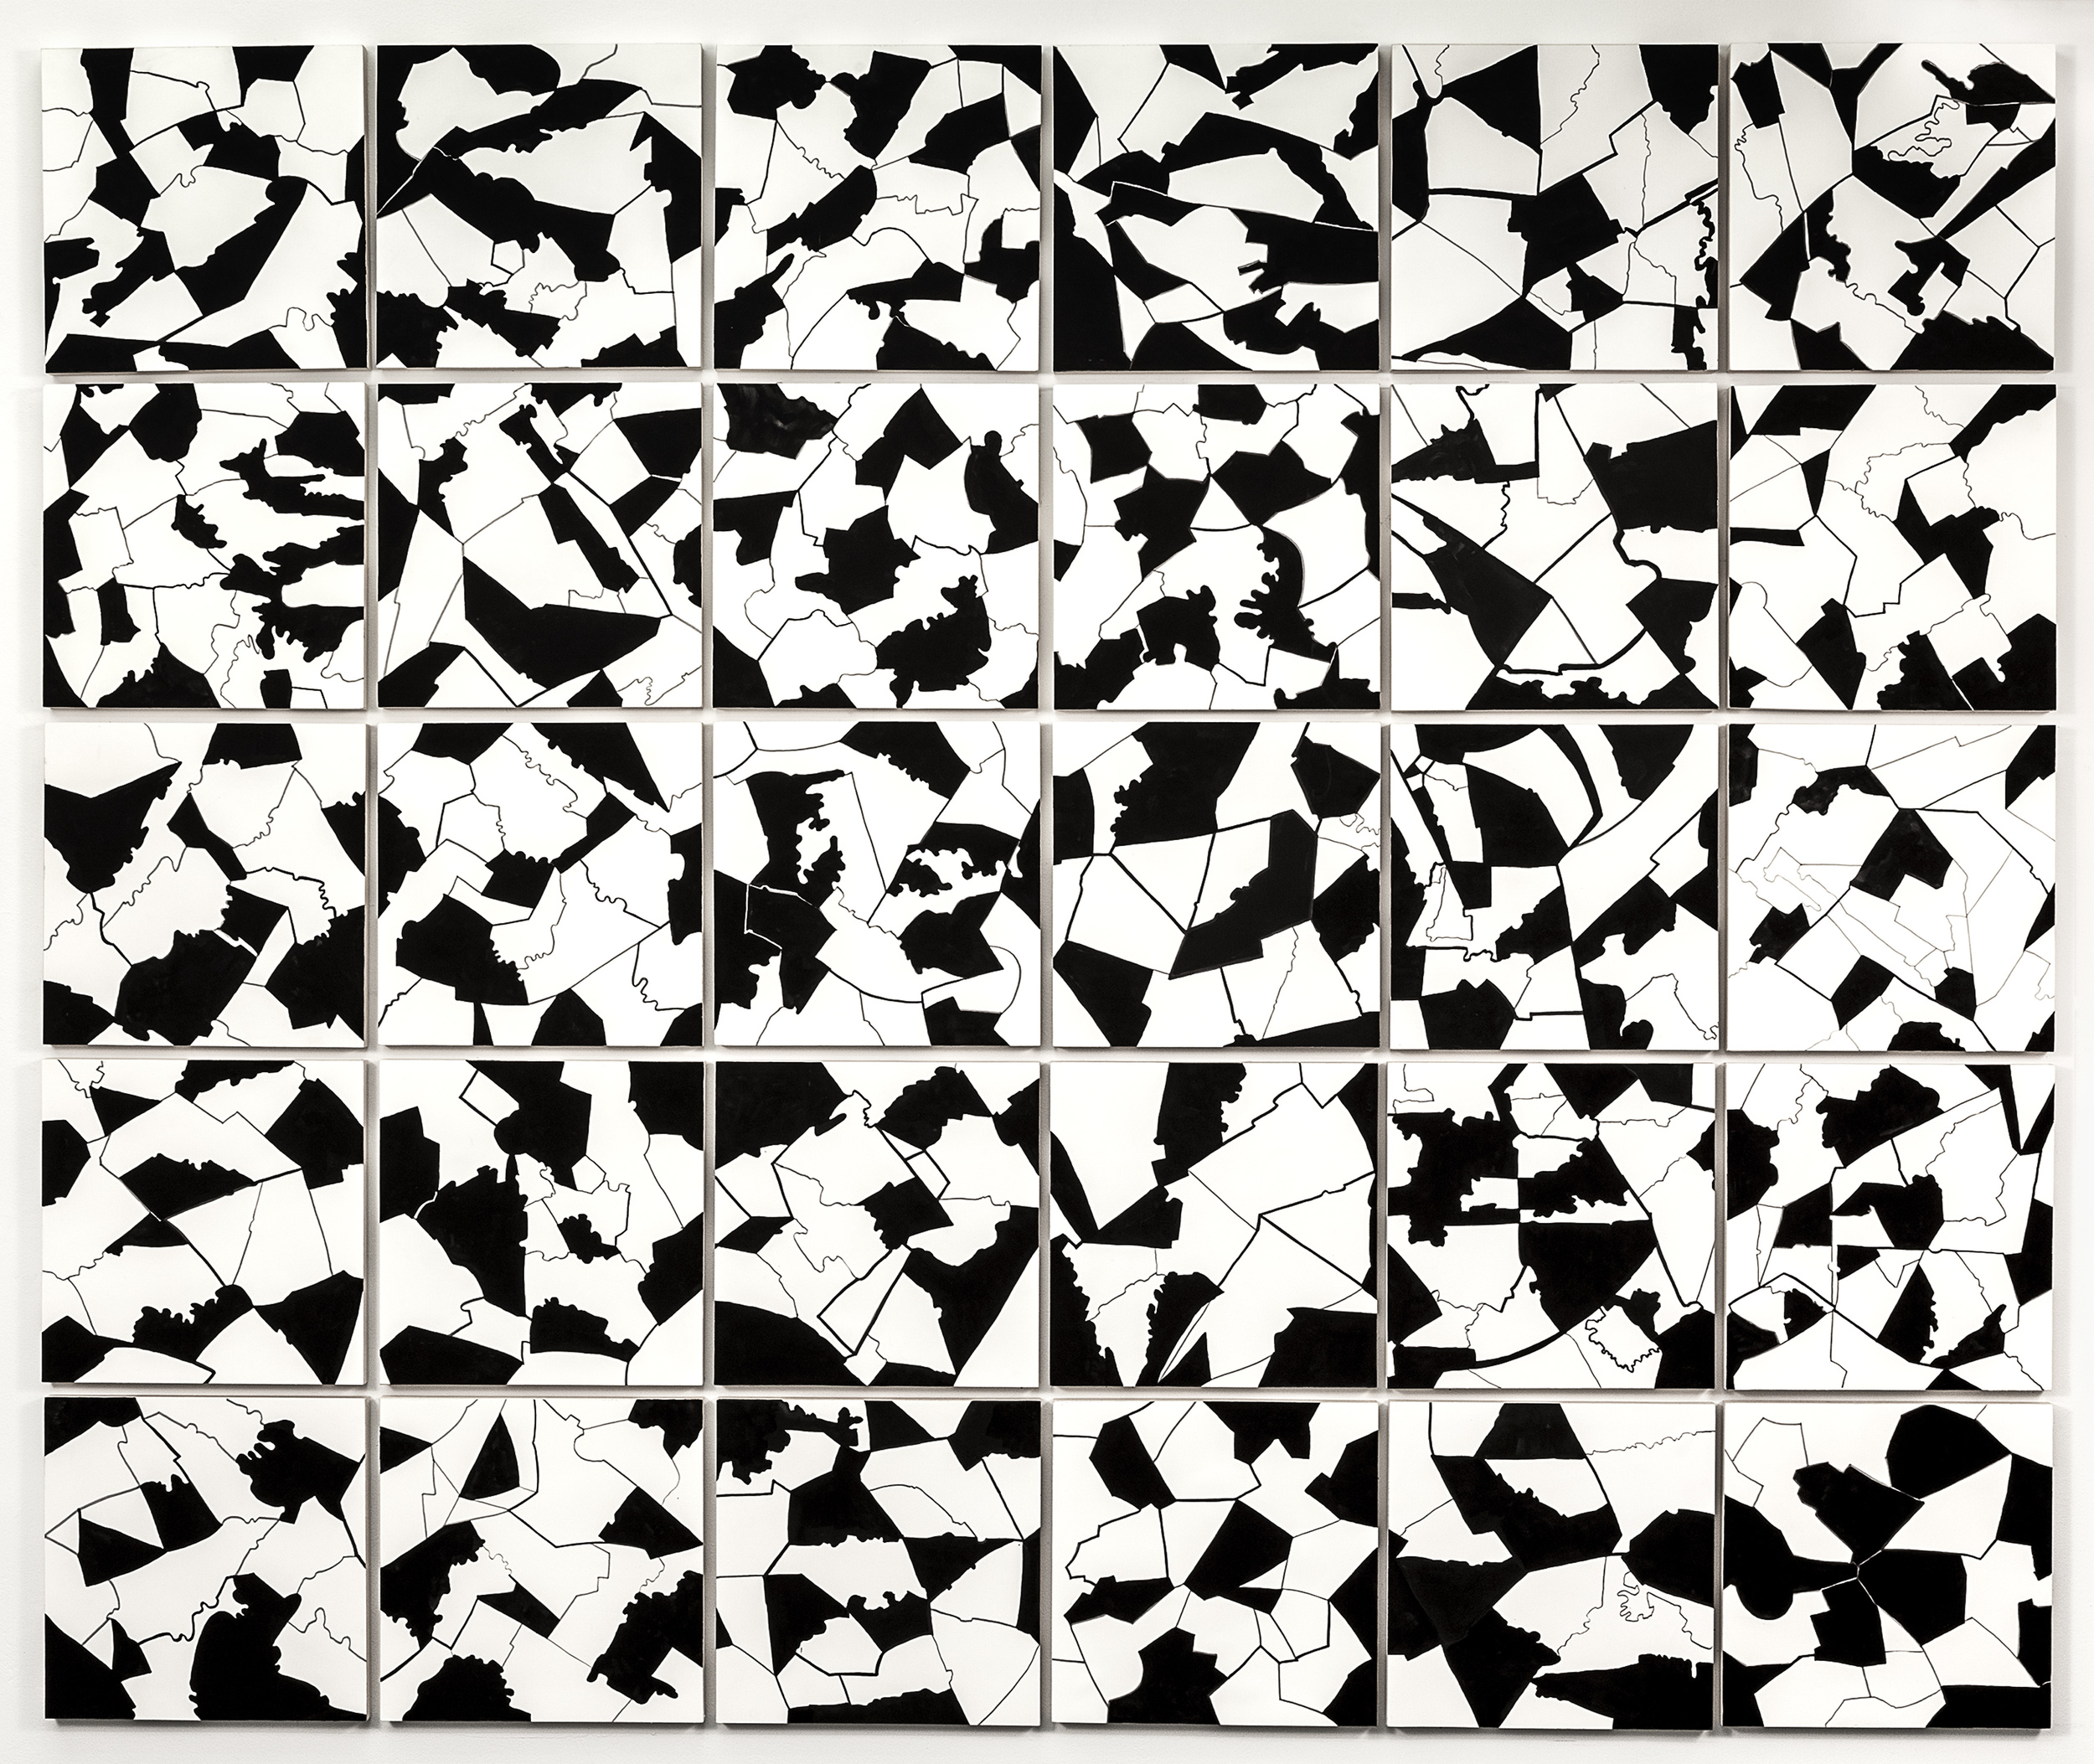    Grid I, &nbsp;2015   Gouache on paper mounted on panel, 30 - 12" X 12" panels   62.5” X 75"  